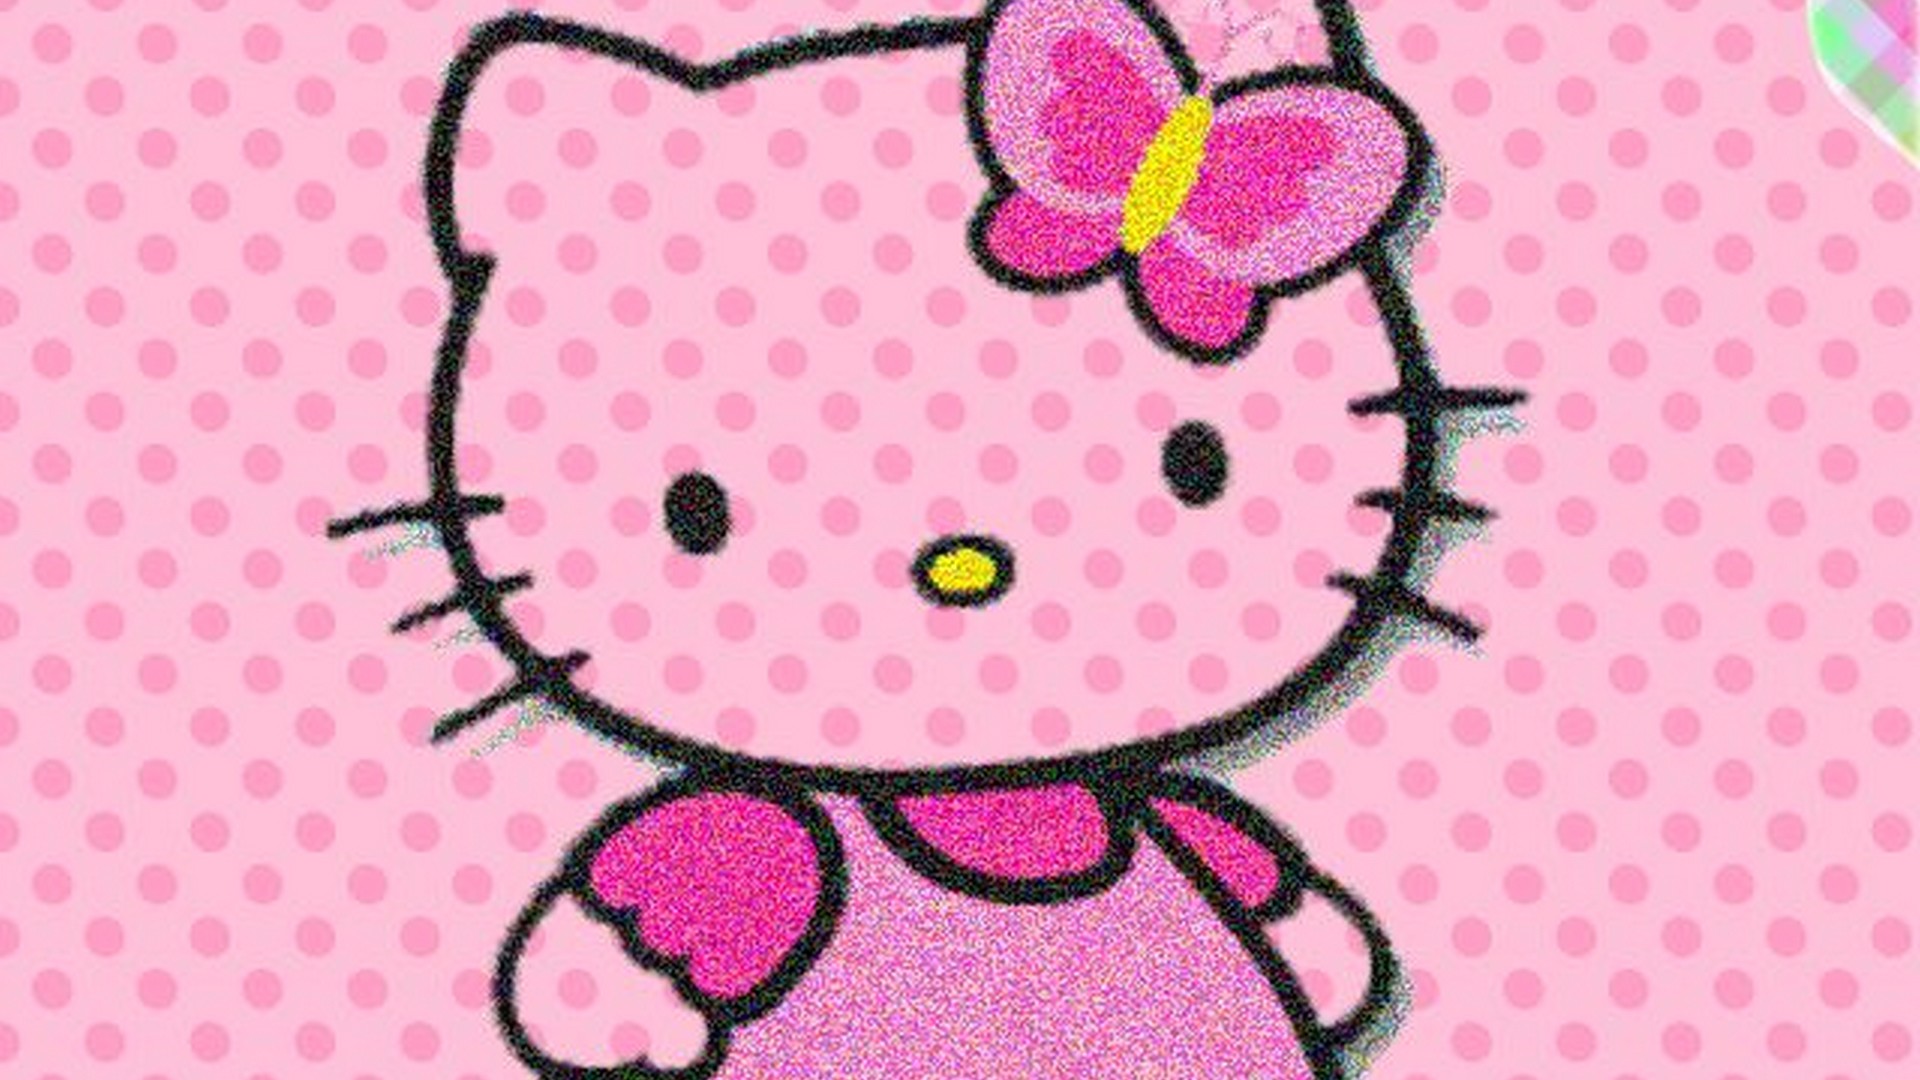 Wallpaper HD Hello Kitty with image resolution 1920x1080 pixel. You can make this wallpaper for your Desktop Computer Backgrounds, Mac Wallpapers, Android Lock screen or iPhone Screensavers